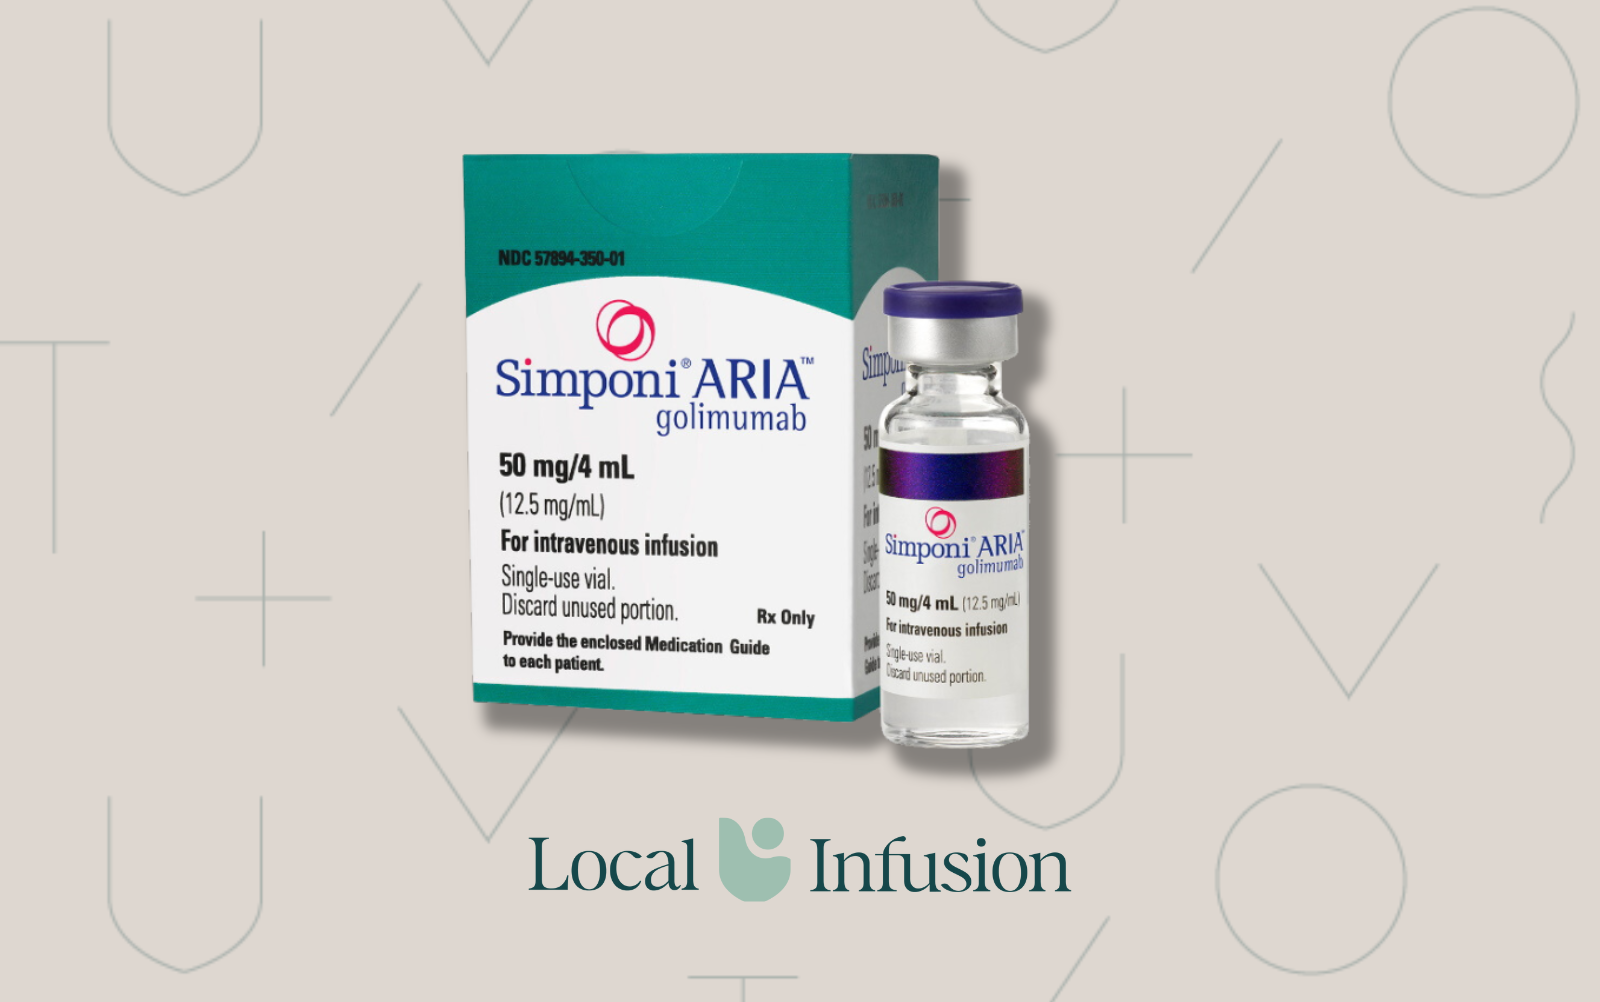 guide-to-simponi-aria-infusion-dosing-cost-side-effects-more